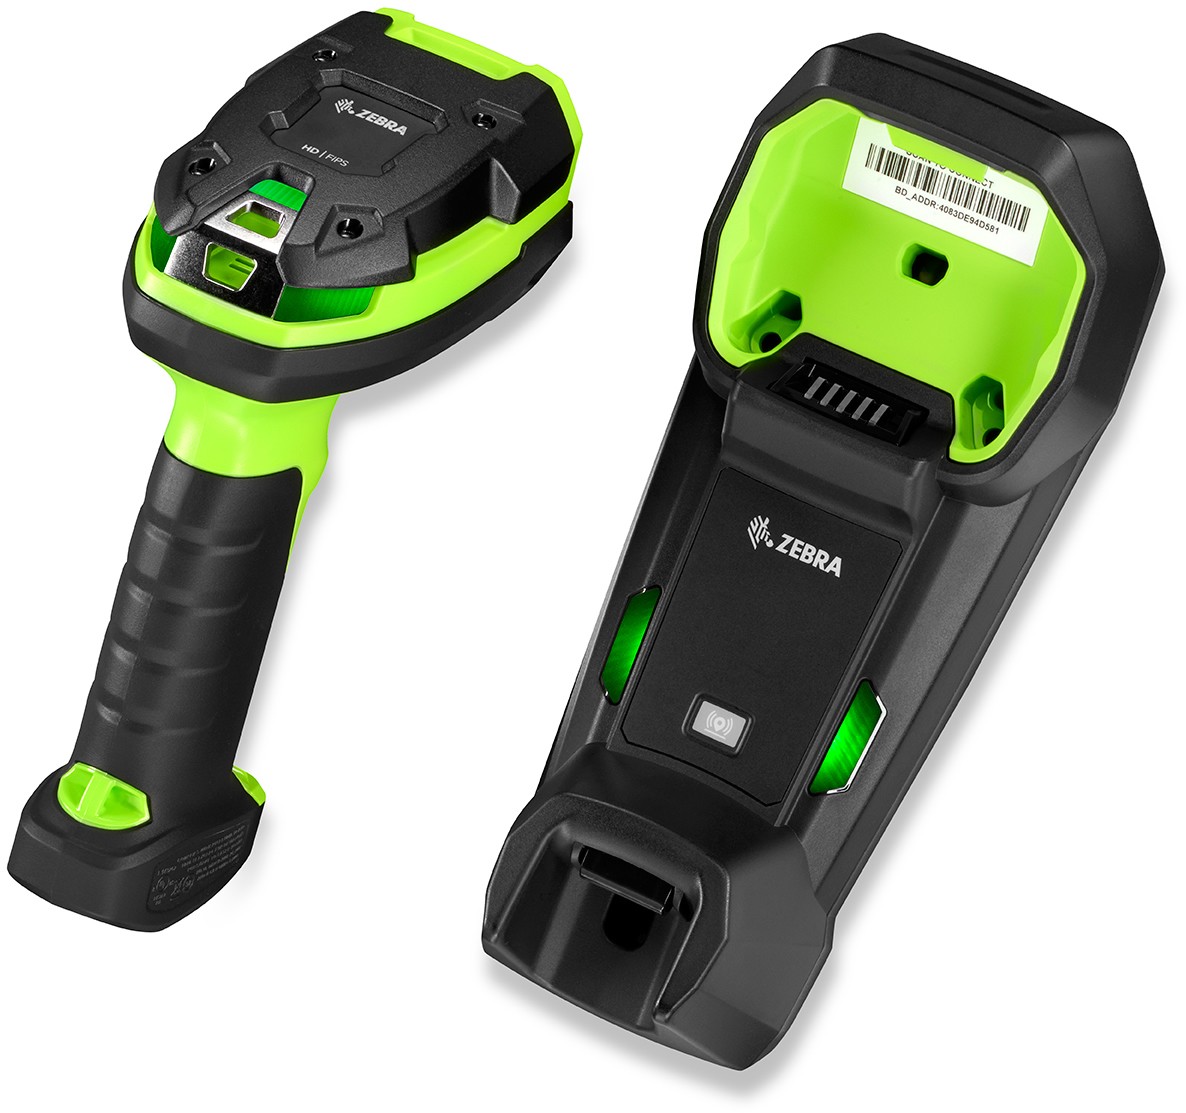 DS3678-HD Rugged Green Standard Cradle USB No Line Cord Kit: DS3678-HD2F003VZWW Scanner, CBA-U42-S07PAR Shielded USB Cable Supports 12V P/S, STB3678-C100F3WW Cradle, PWR-BGA12V50W0WW Power Supply and CBL-DC-451A1-01 DC Line Cord